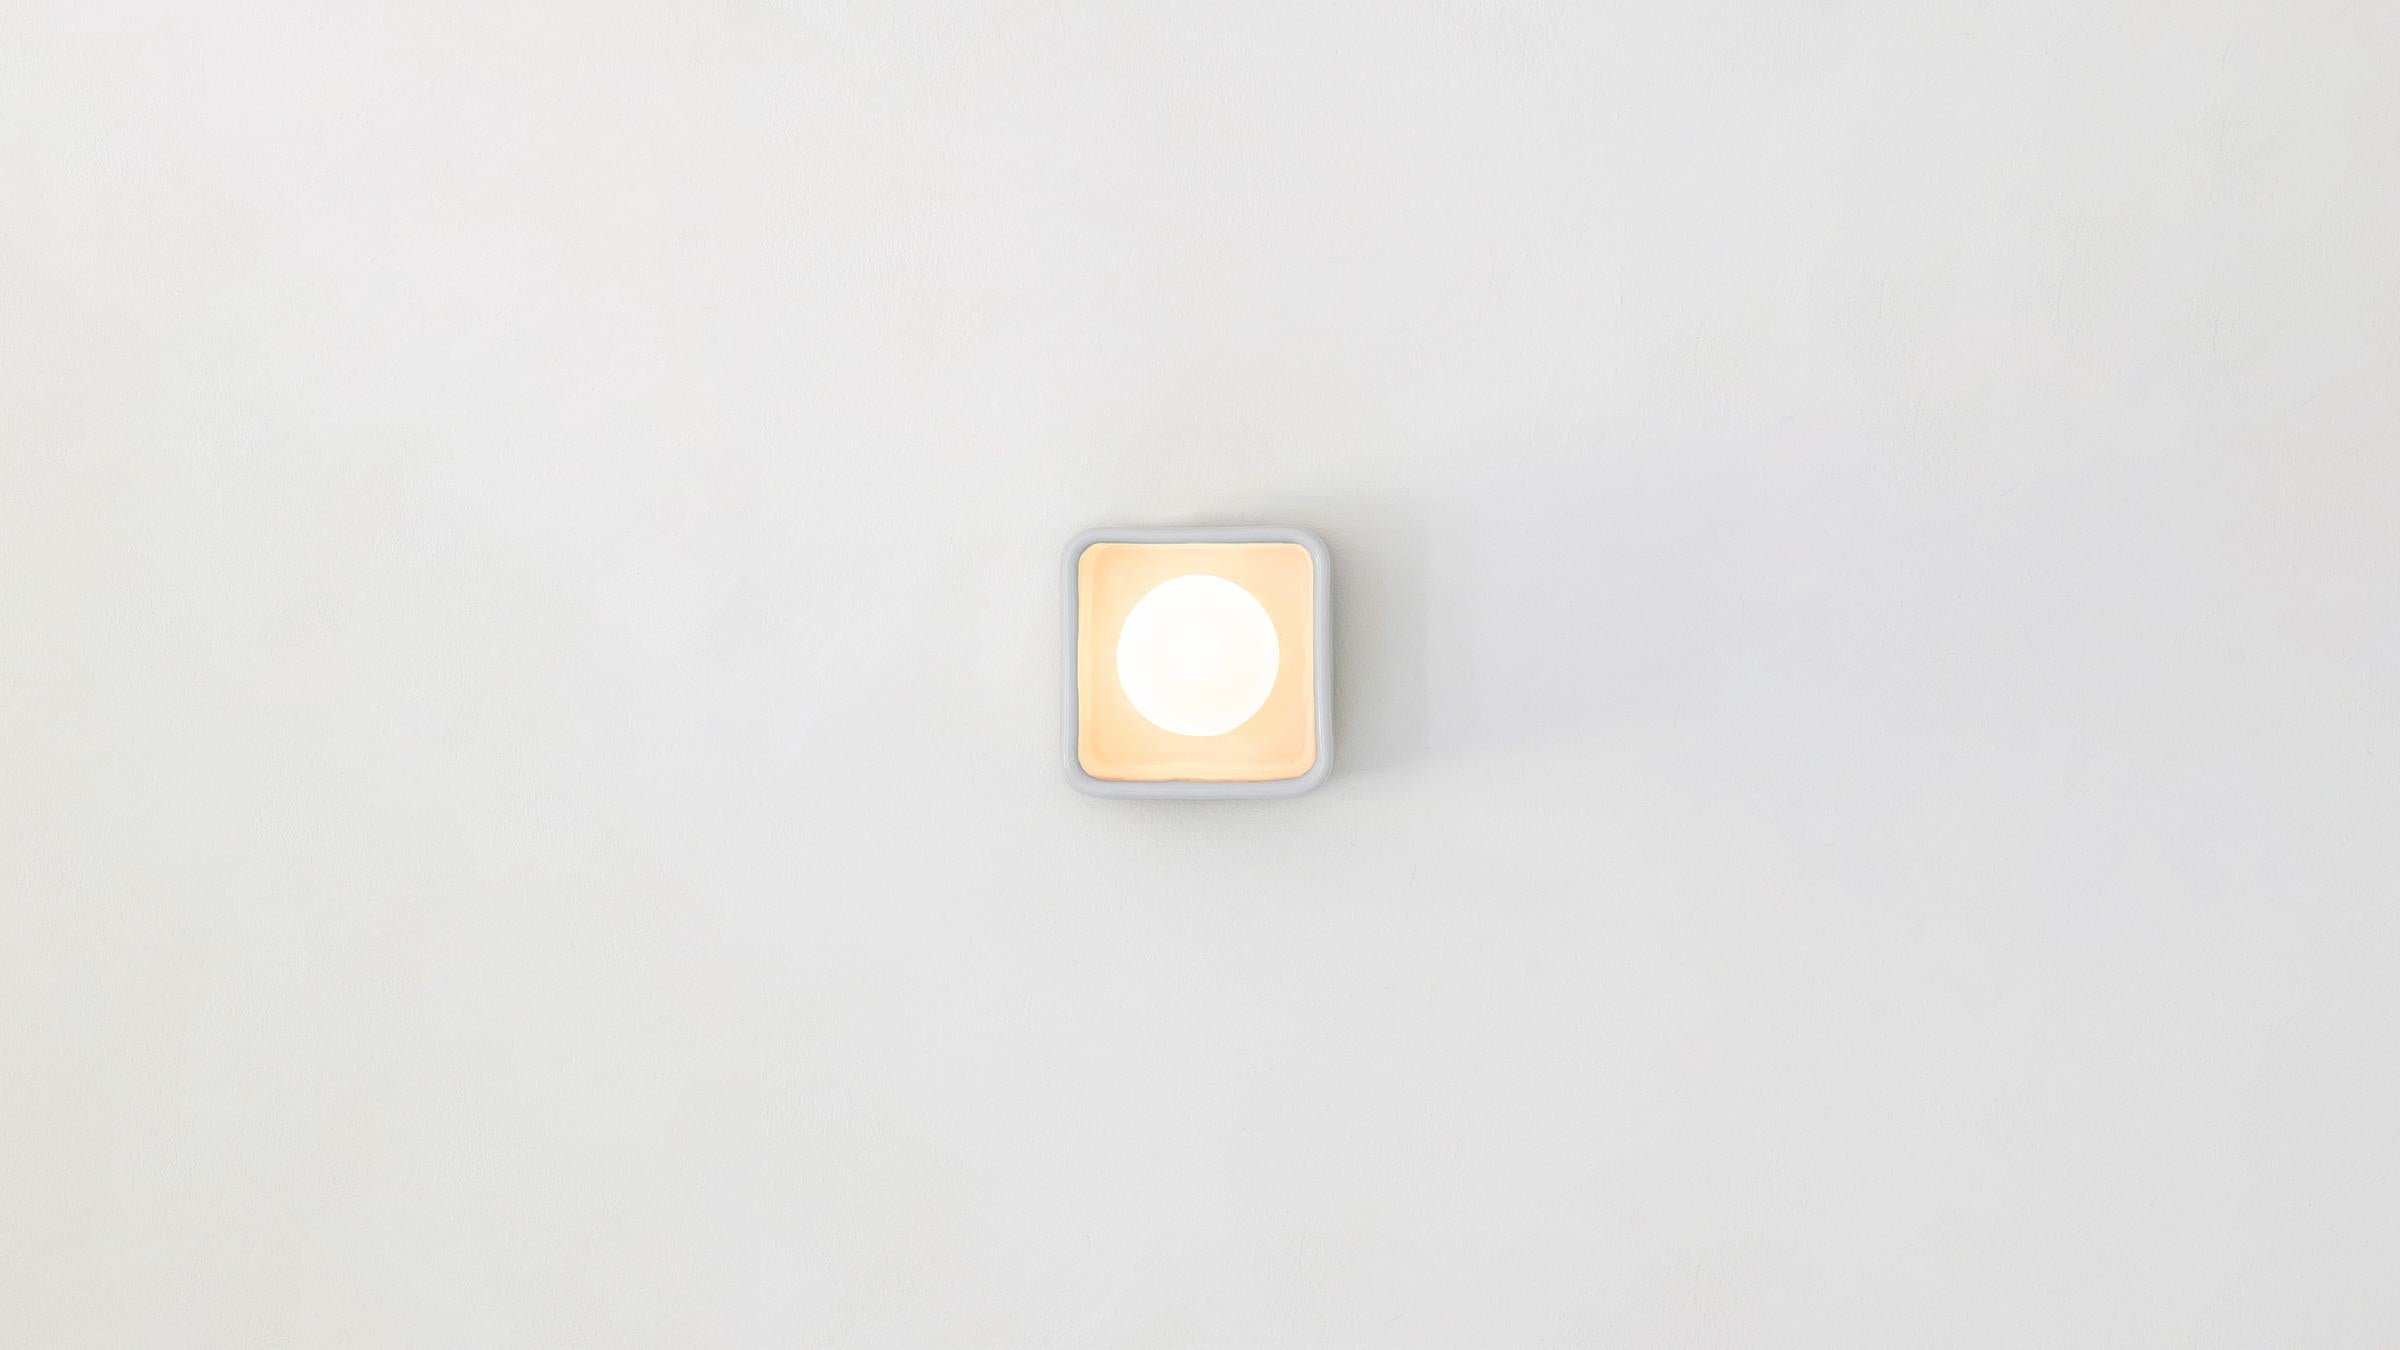 The Brick I is a modern interpretation of the Classic vanity light, celebrating the dialogue between the handmade and the serial. A cast earthenware base hand-glazed in soft white frames a matte opal globe, suggesting a hollowed brick cradling a